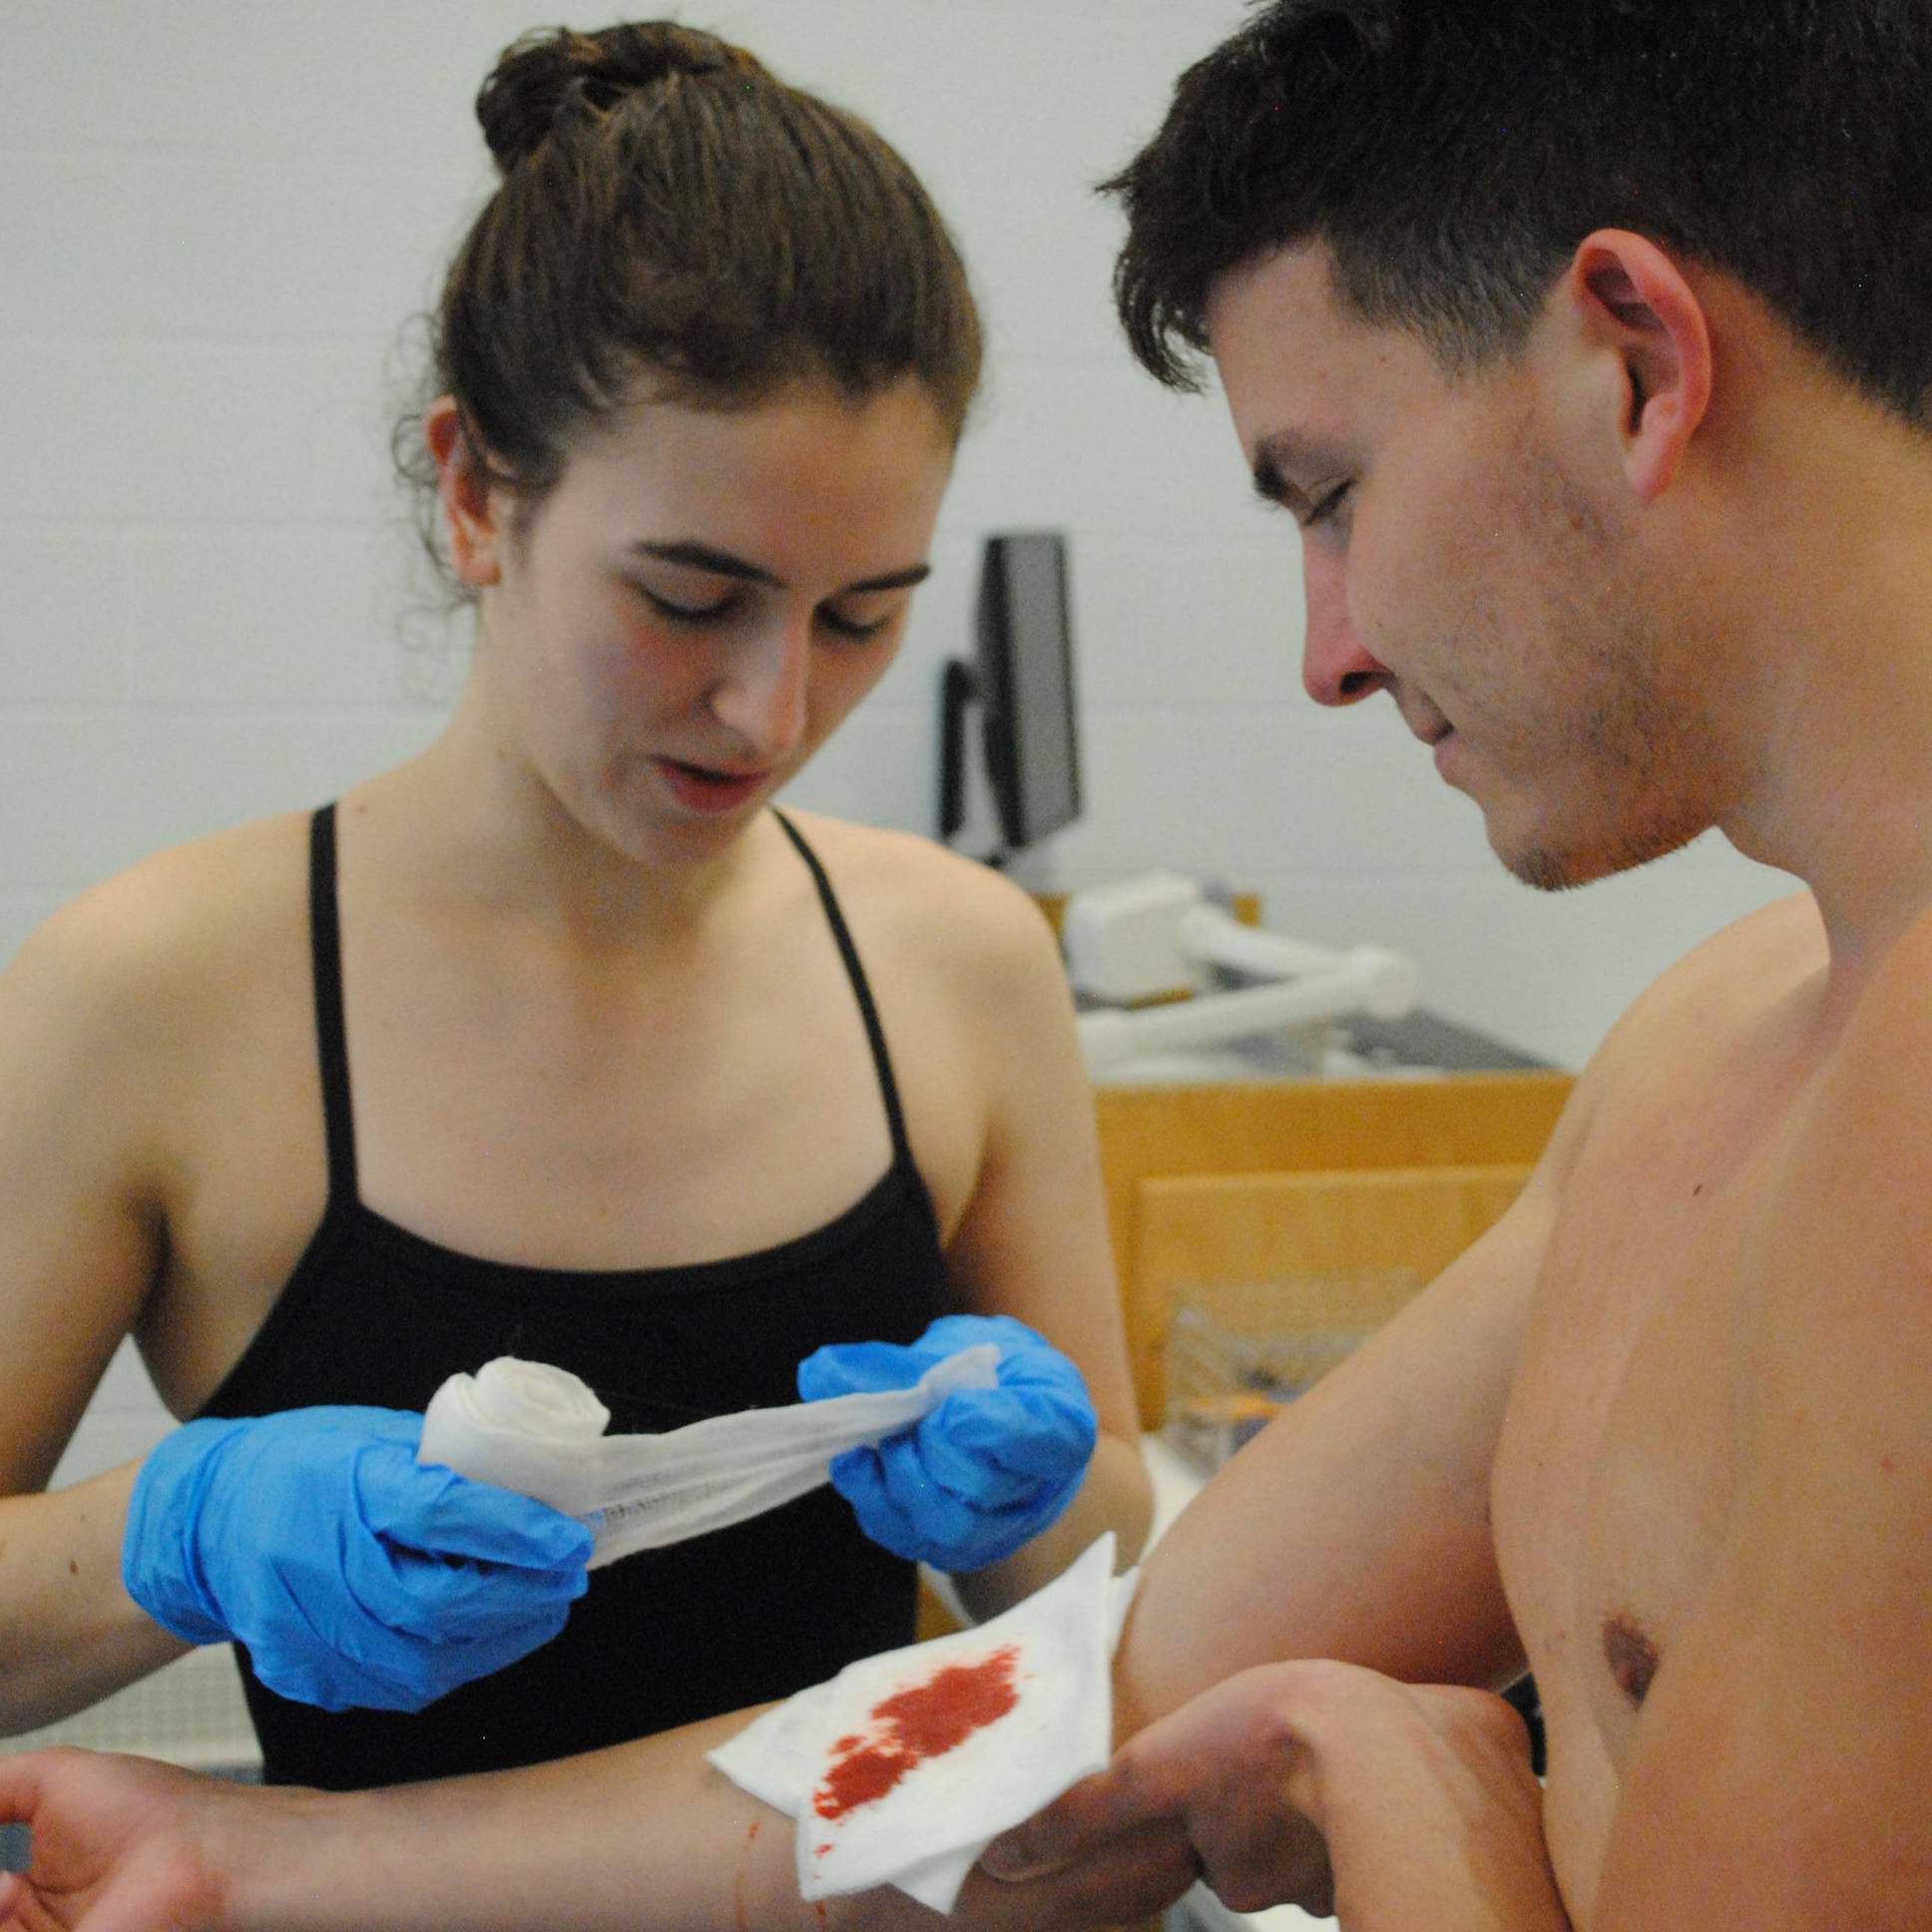 lifeguard providing first aid for a cut on the forearm